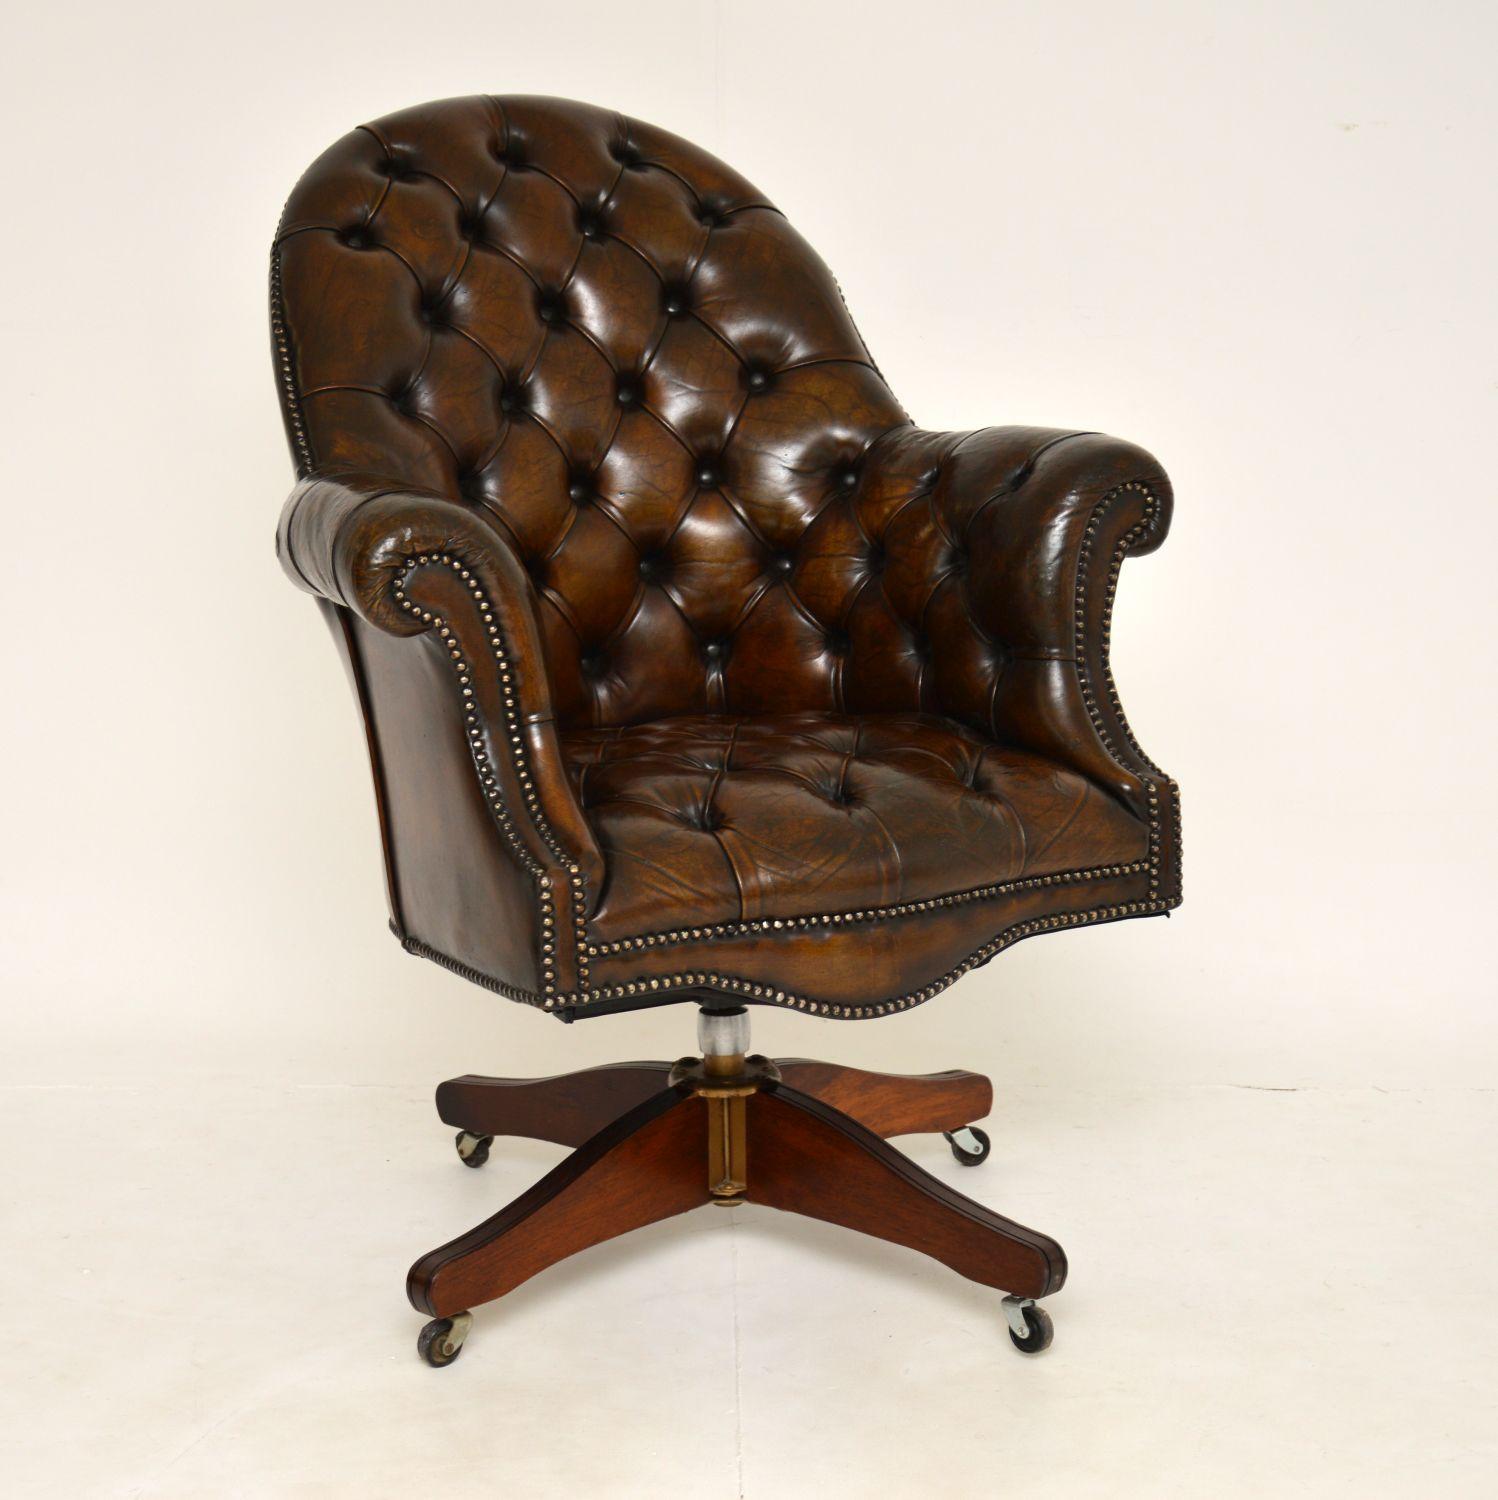 A magnificent vintage deep buttoned leather swivel desk chair. This was made in England & I would date it from around the 1950’s period.

The quality is amazing and this is extremely comfortable. It swivels and rolls smoothly on casters, there is